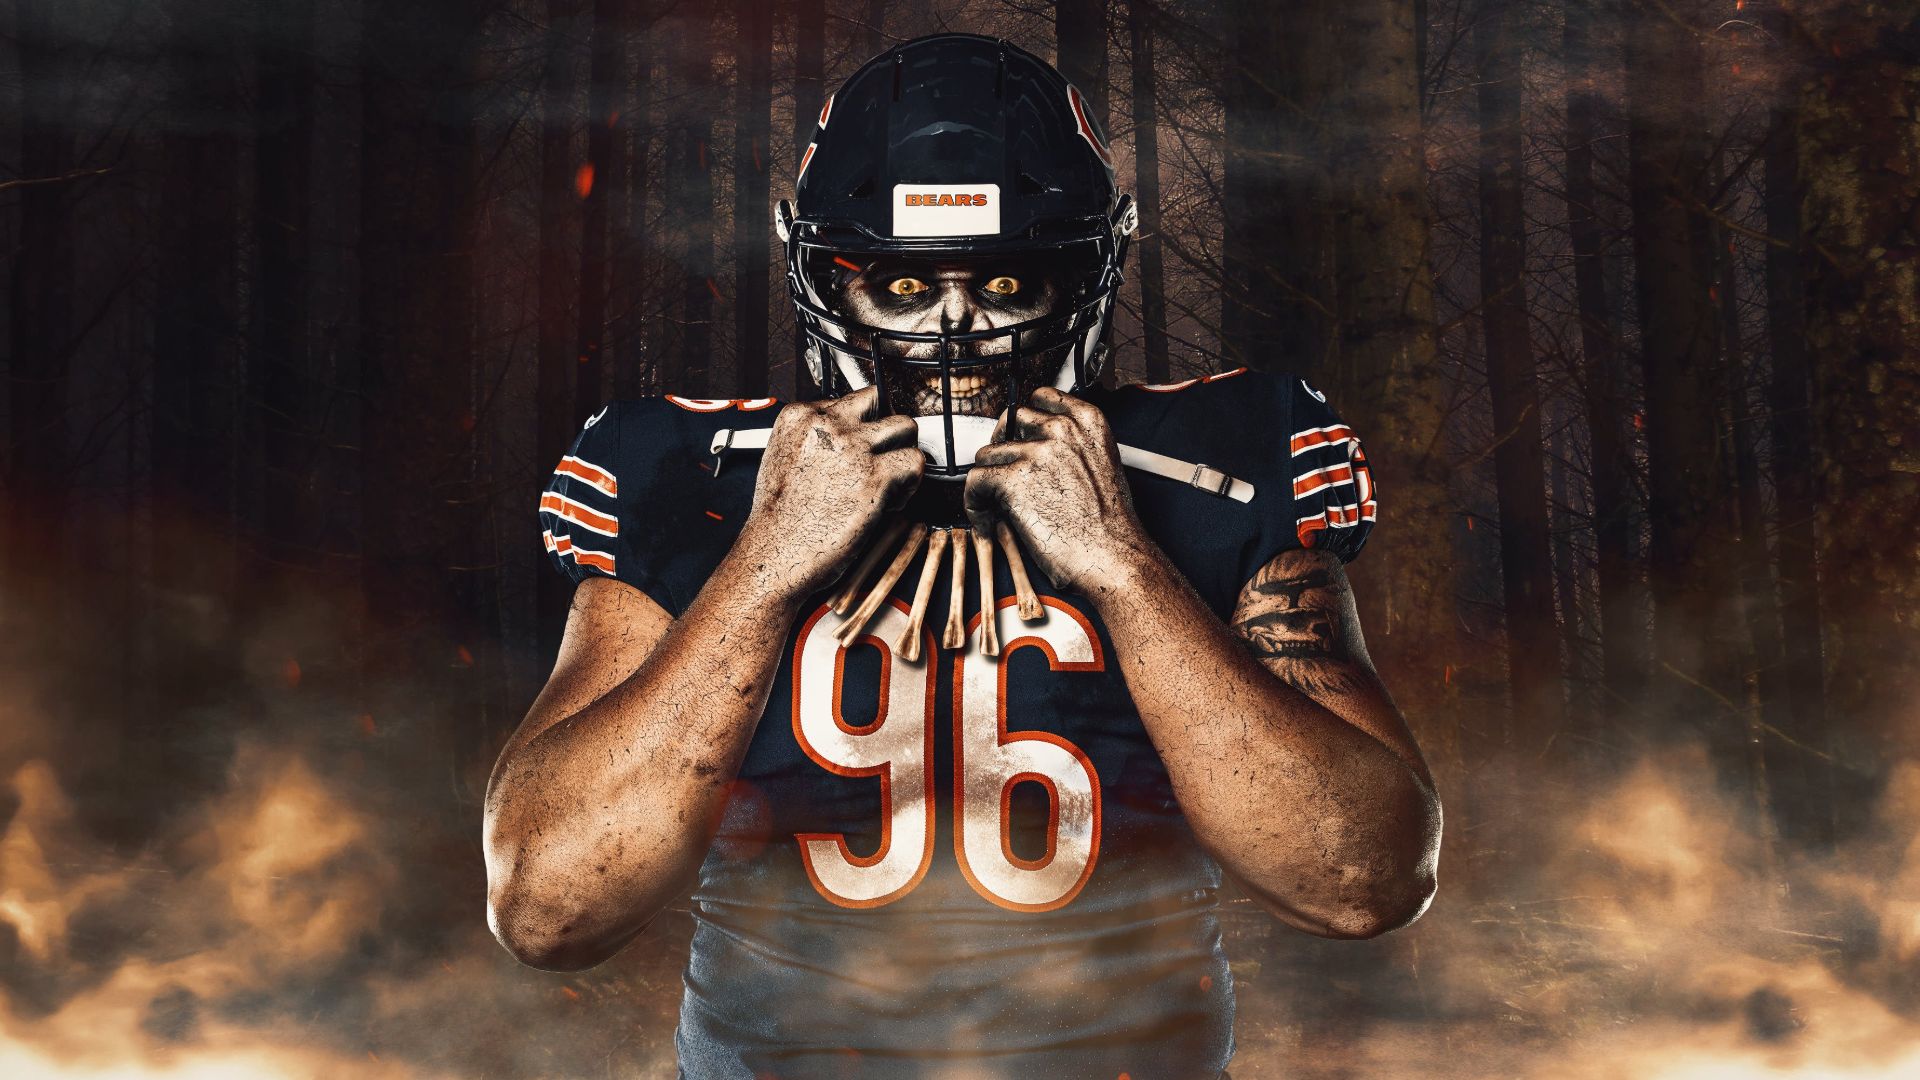 100+] Chicago Bears Wallpapers